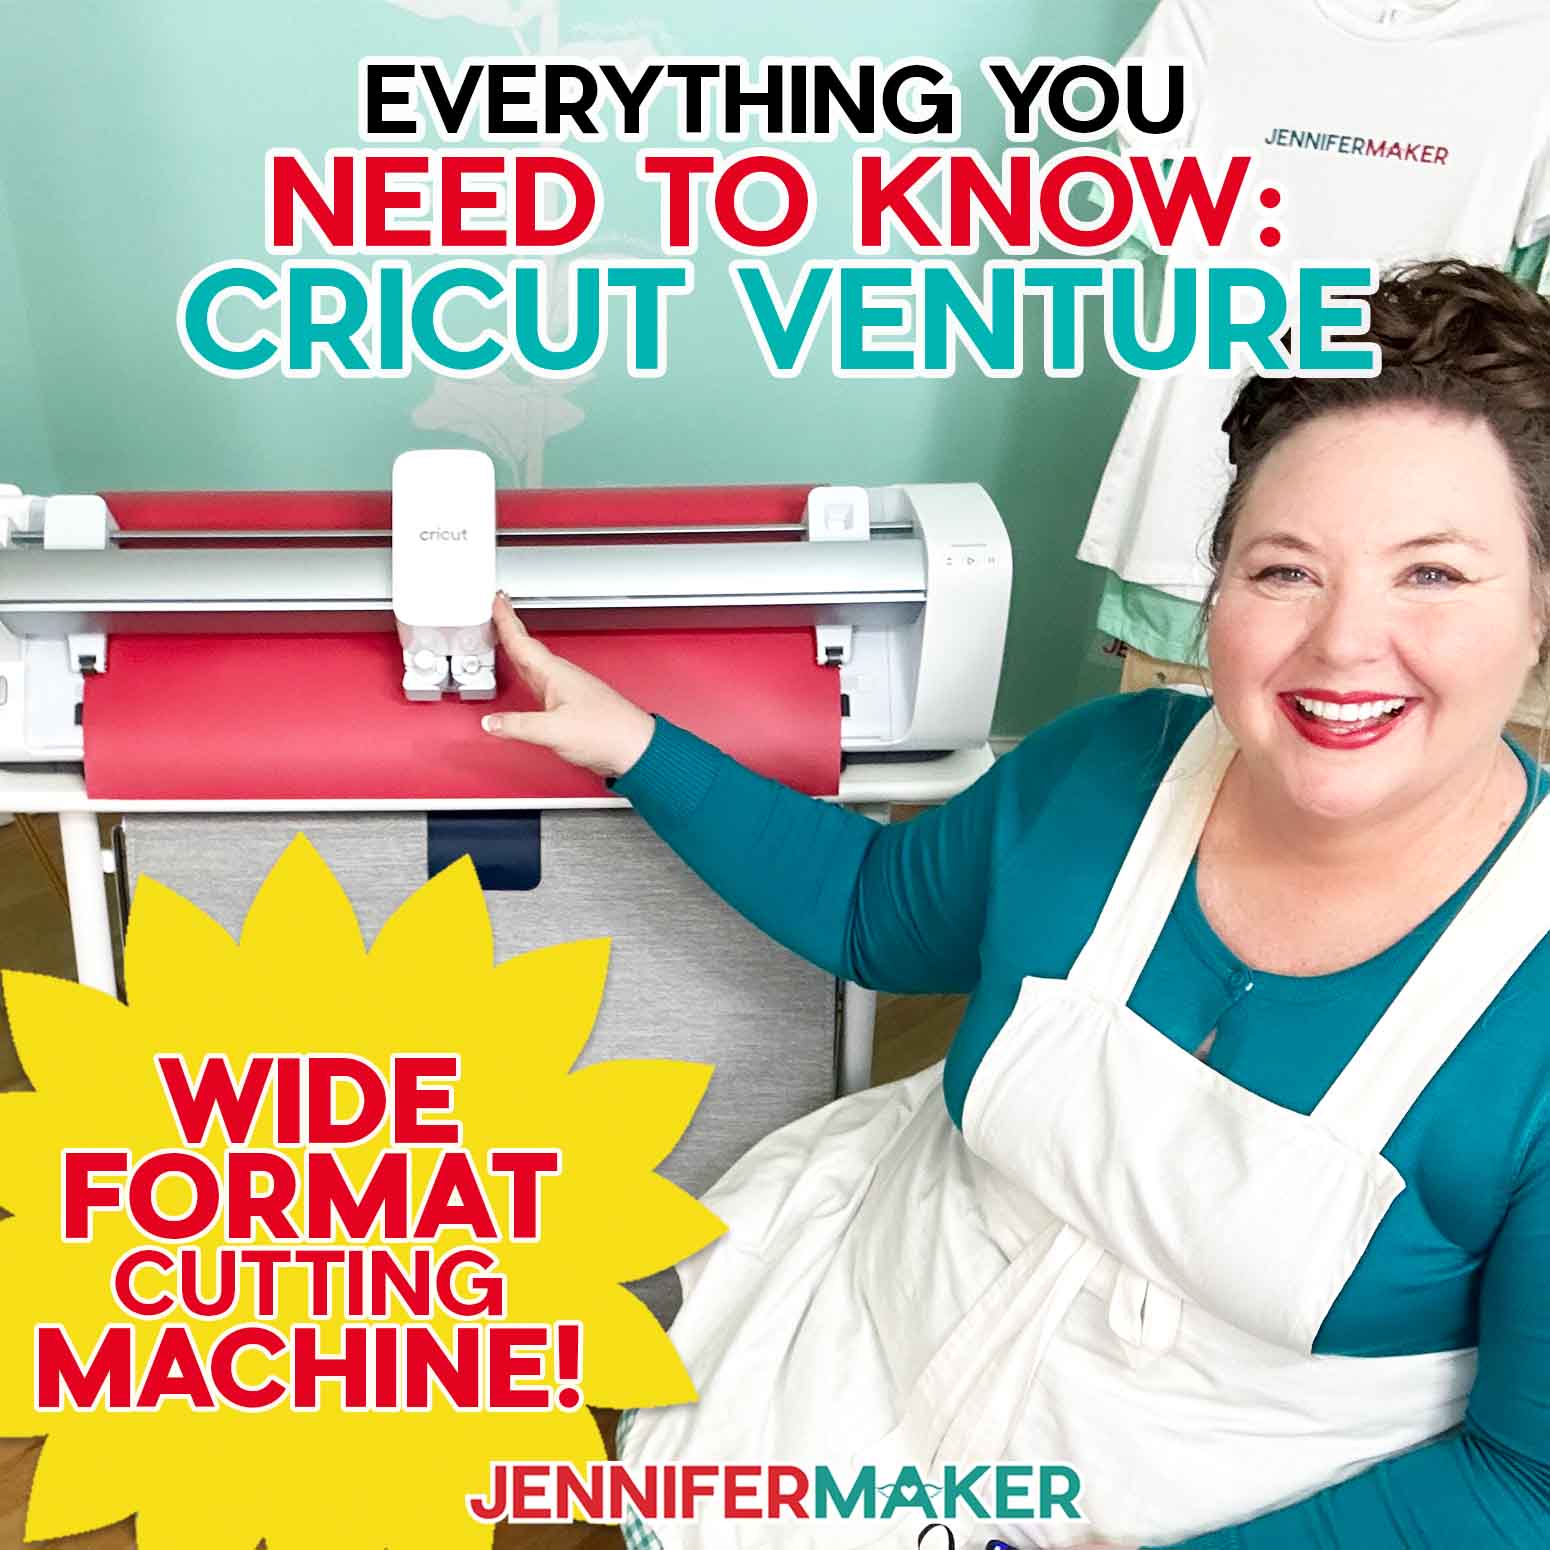 Cricut Venture: Everything You Need to Know About the New Large Format Cutting Machine